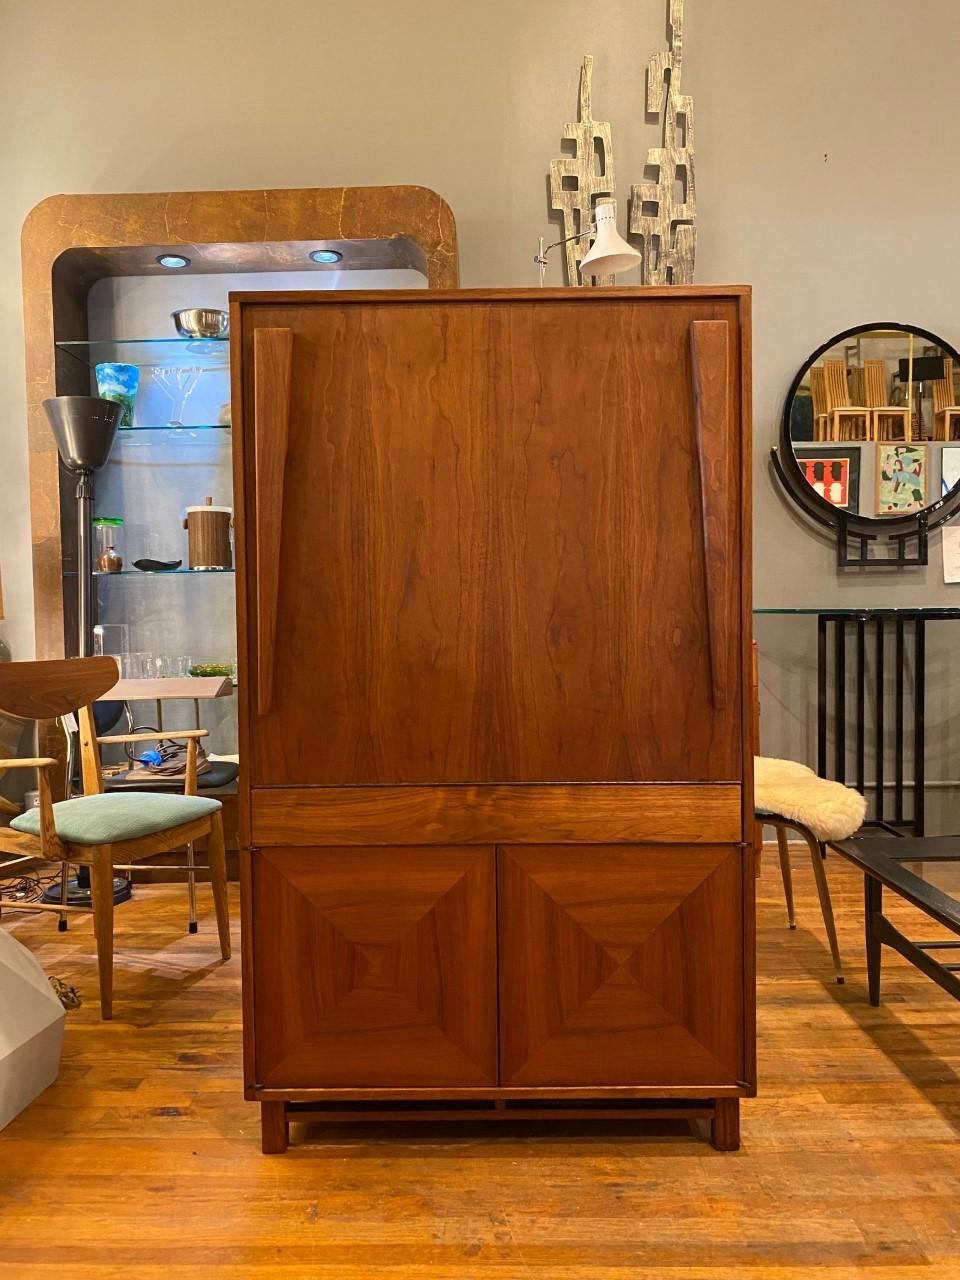 Incredible and intelligent design by John Keal for Brown Saltman. This incredible vintage cabinet from the late 1950s transcends decades to amaze with intelligent design and purpose. On the outside, the cabinet is minimal and clean lined with two